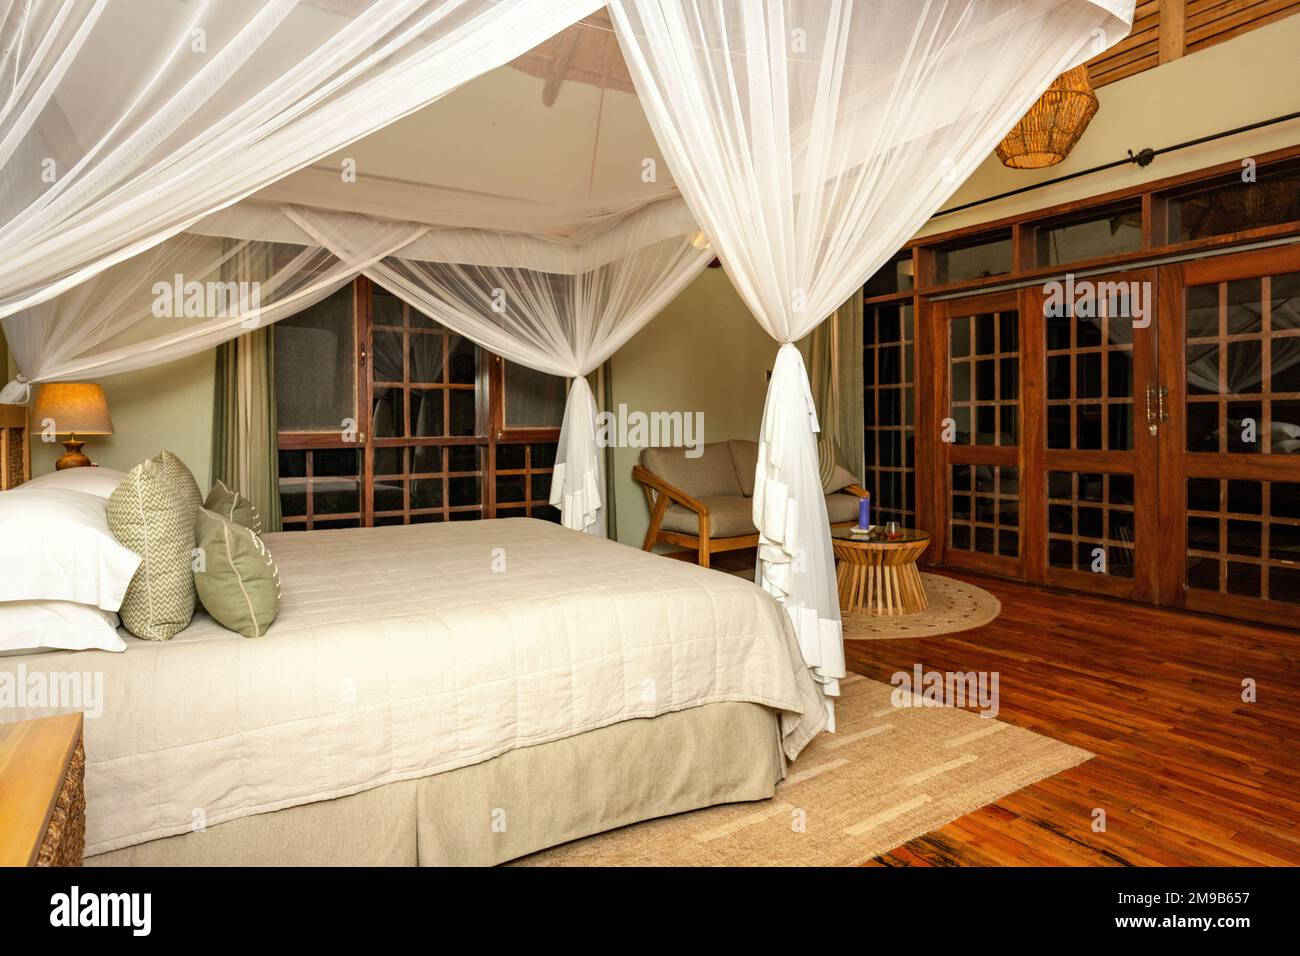 The main bedroom area of the cottage accommodation at Primate Lodge, Kibale National Park, Uganda. Stock Photo